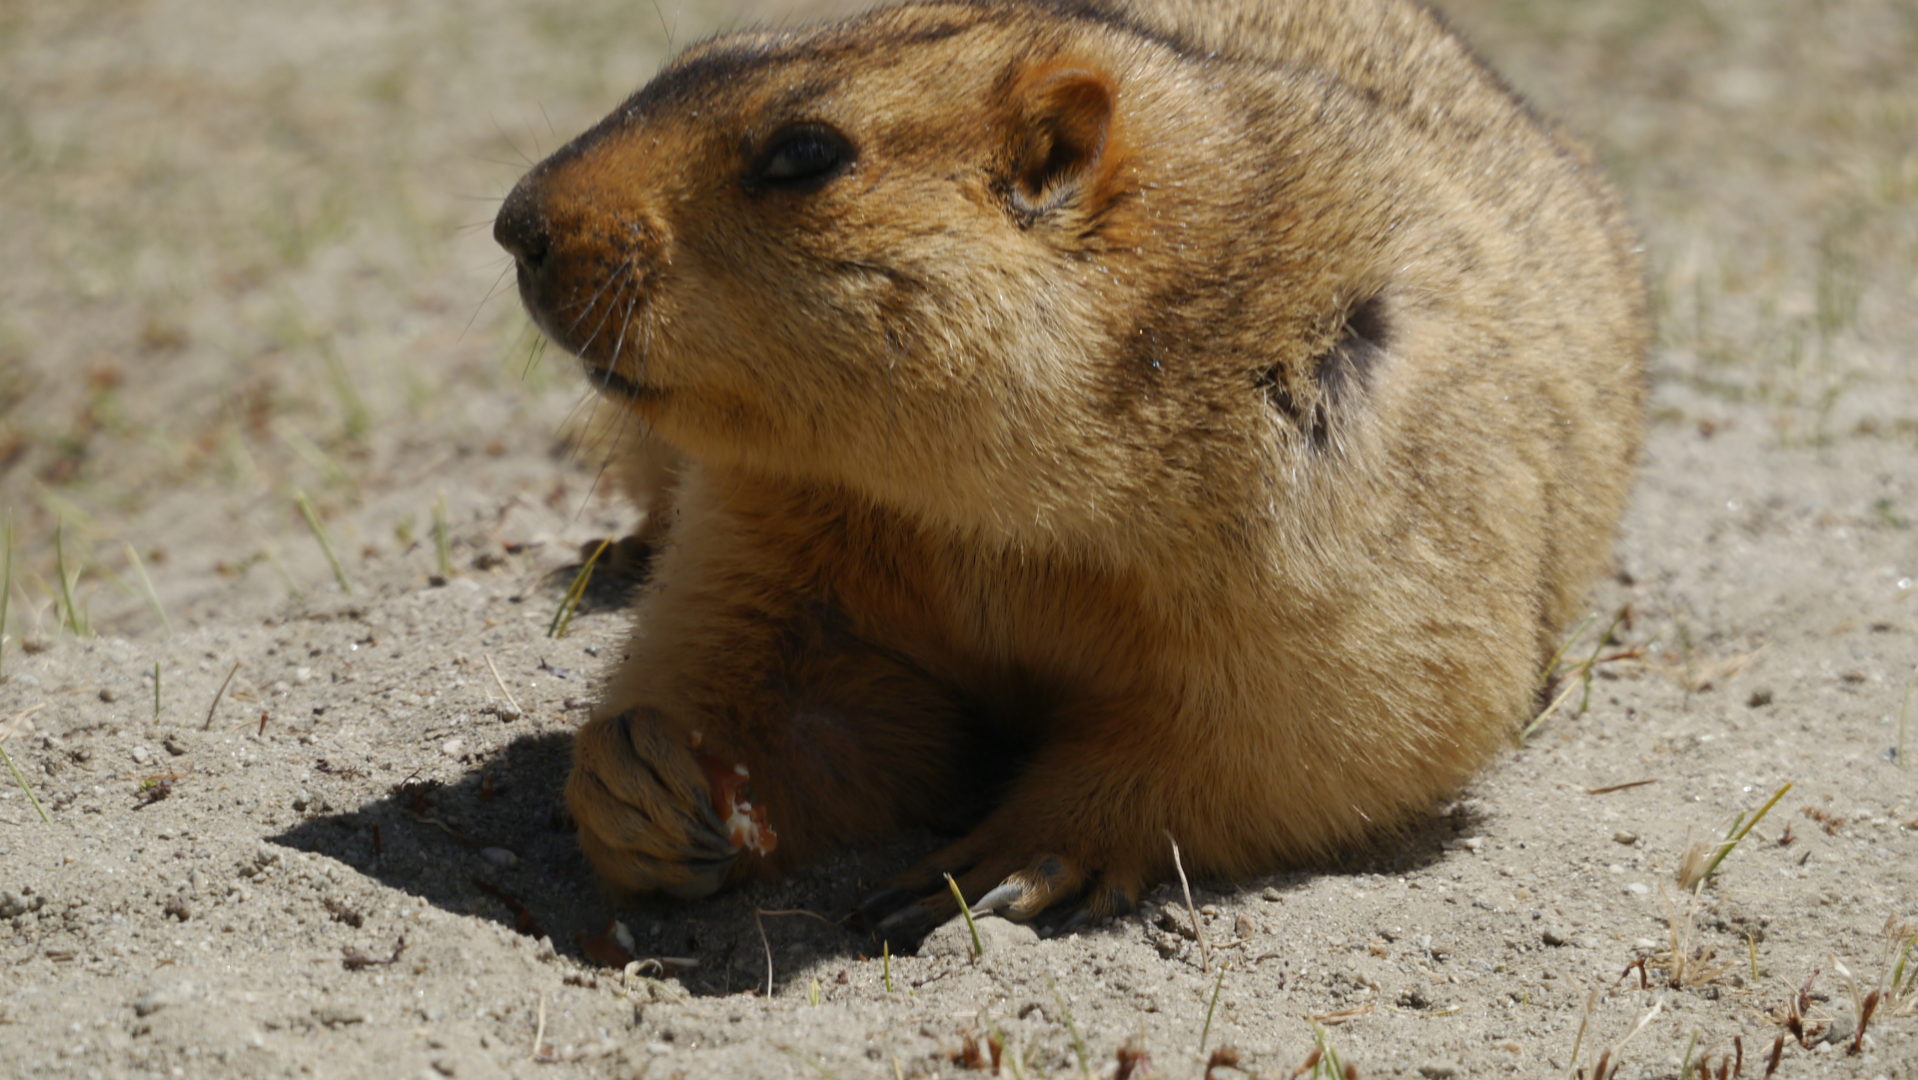 A marmot. Marmots are large squirrels that live on the ground. And since squirrels are basically tree rats, that makes marmots ... very, very large rats?